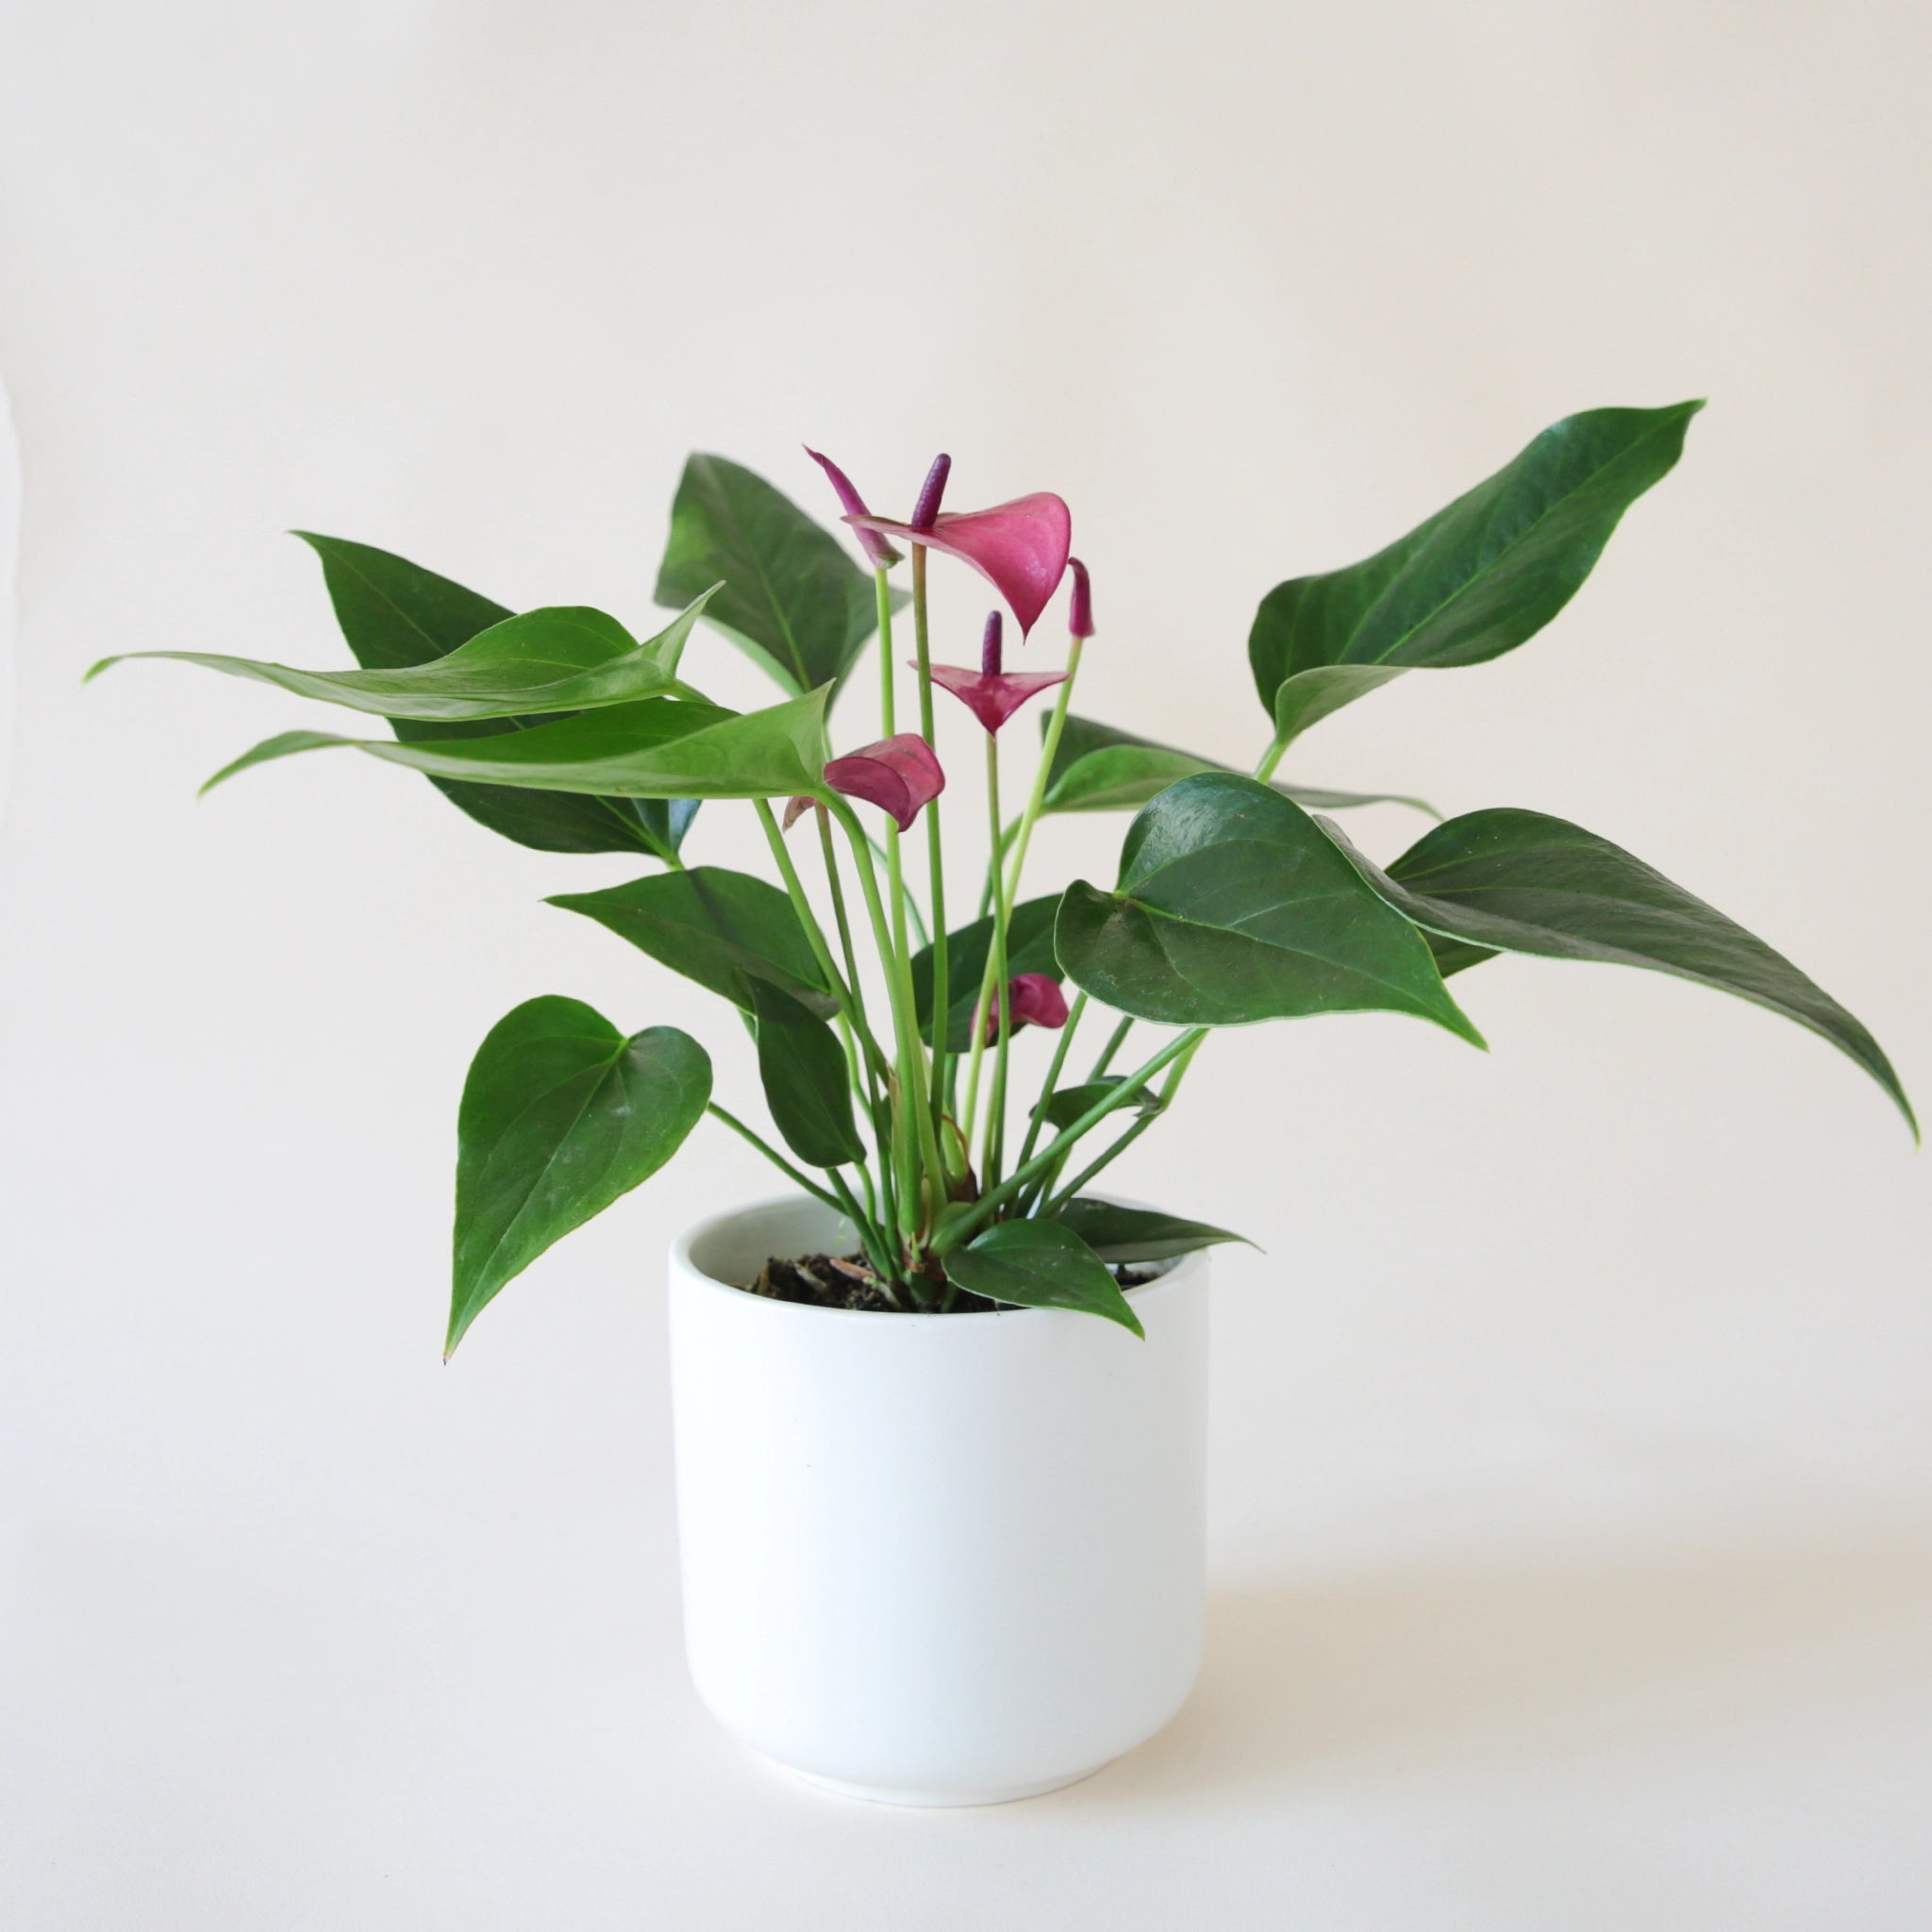 Anthurium 'Zizou' Purple planted in a round white pot. Anthurium has dark green spade shaped leaves and tall flat grape colored flower petals and dark purple stamen.